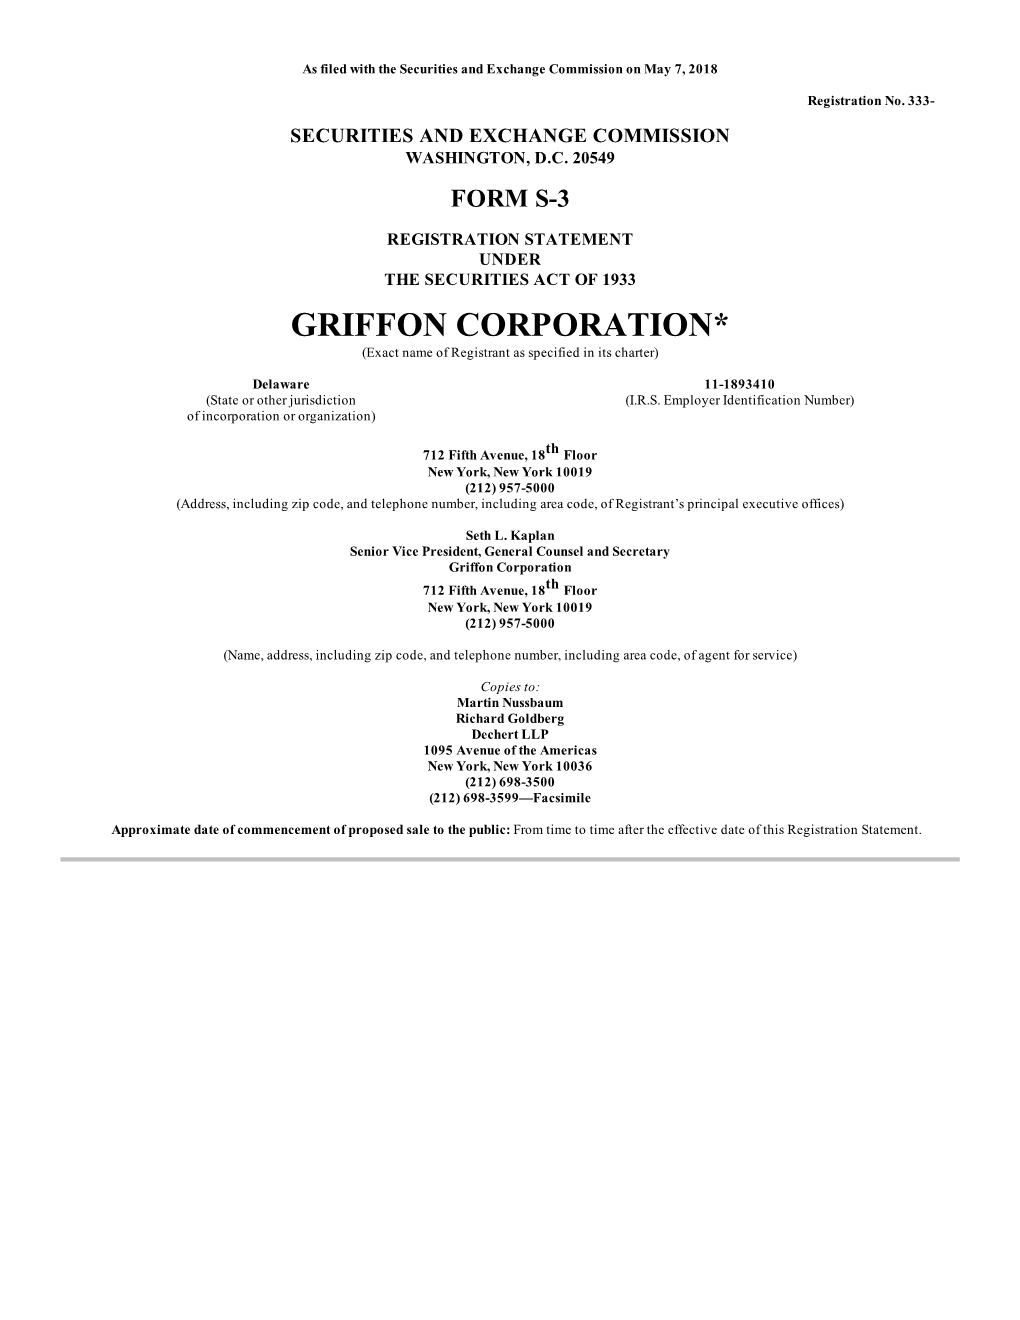 GRIFFON CORPORATION* (Exact Name of Registrant As Specified in Its Charter)